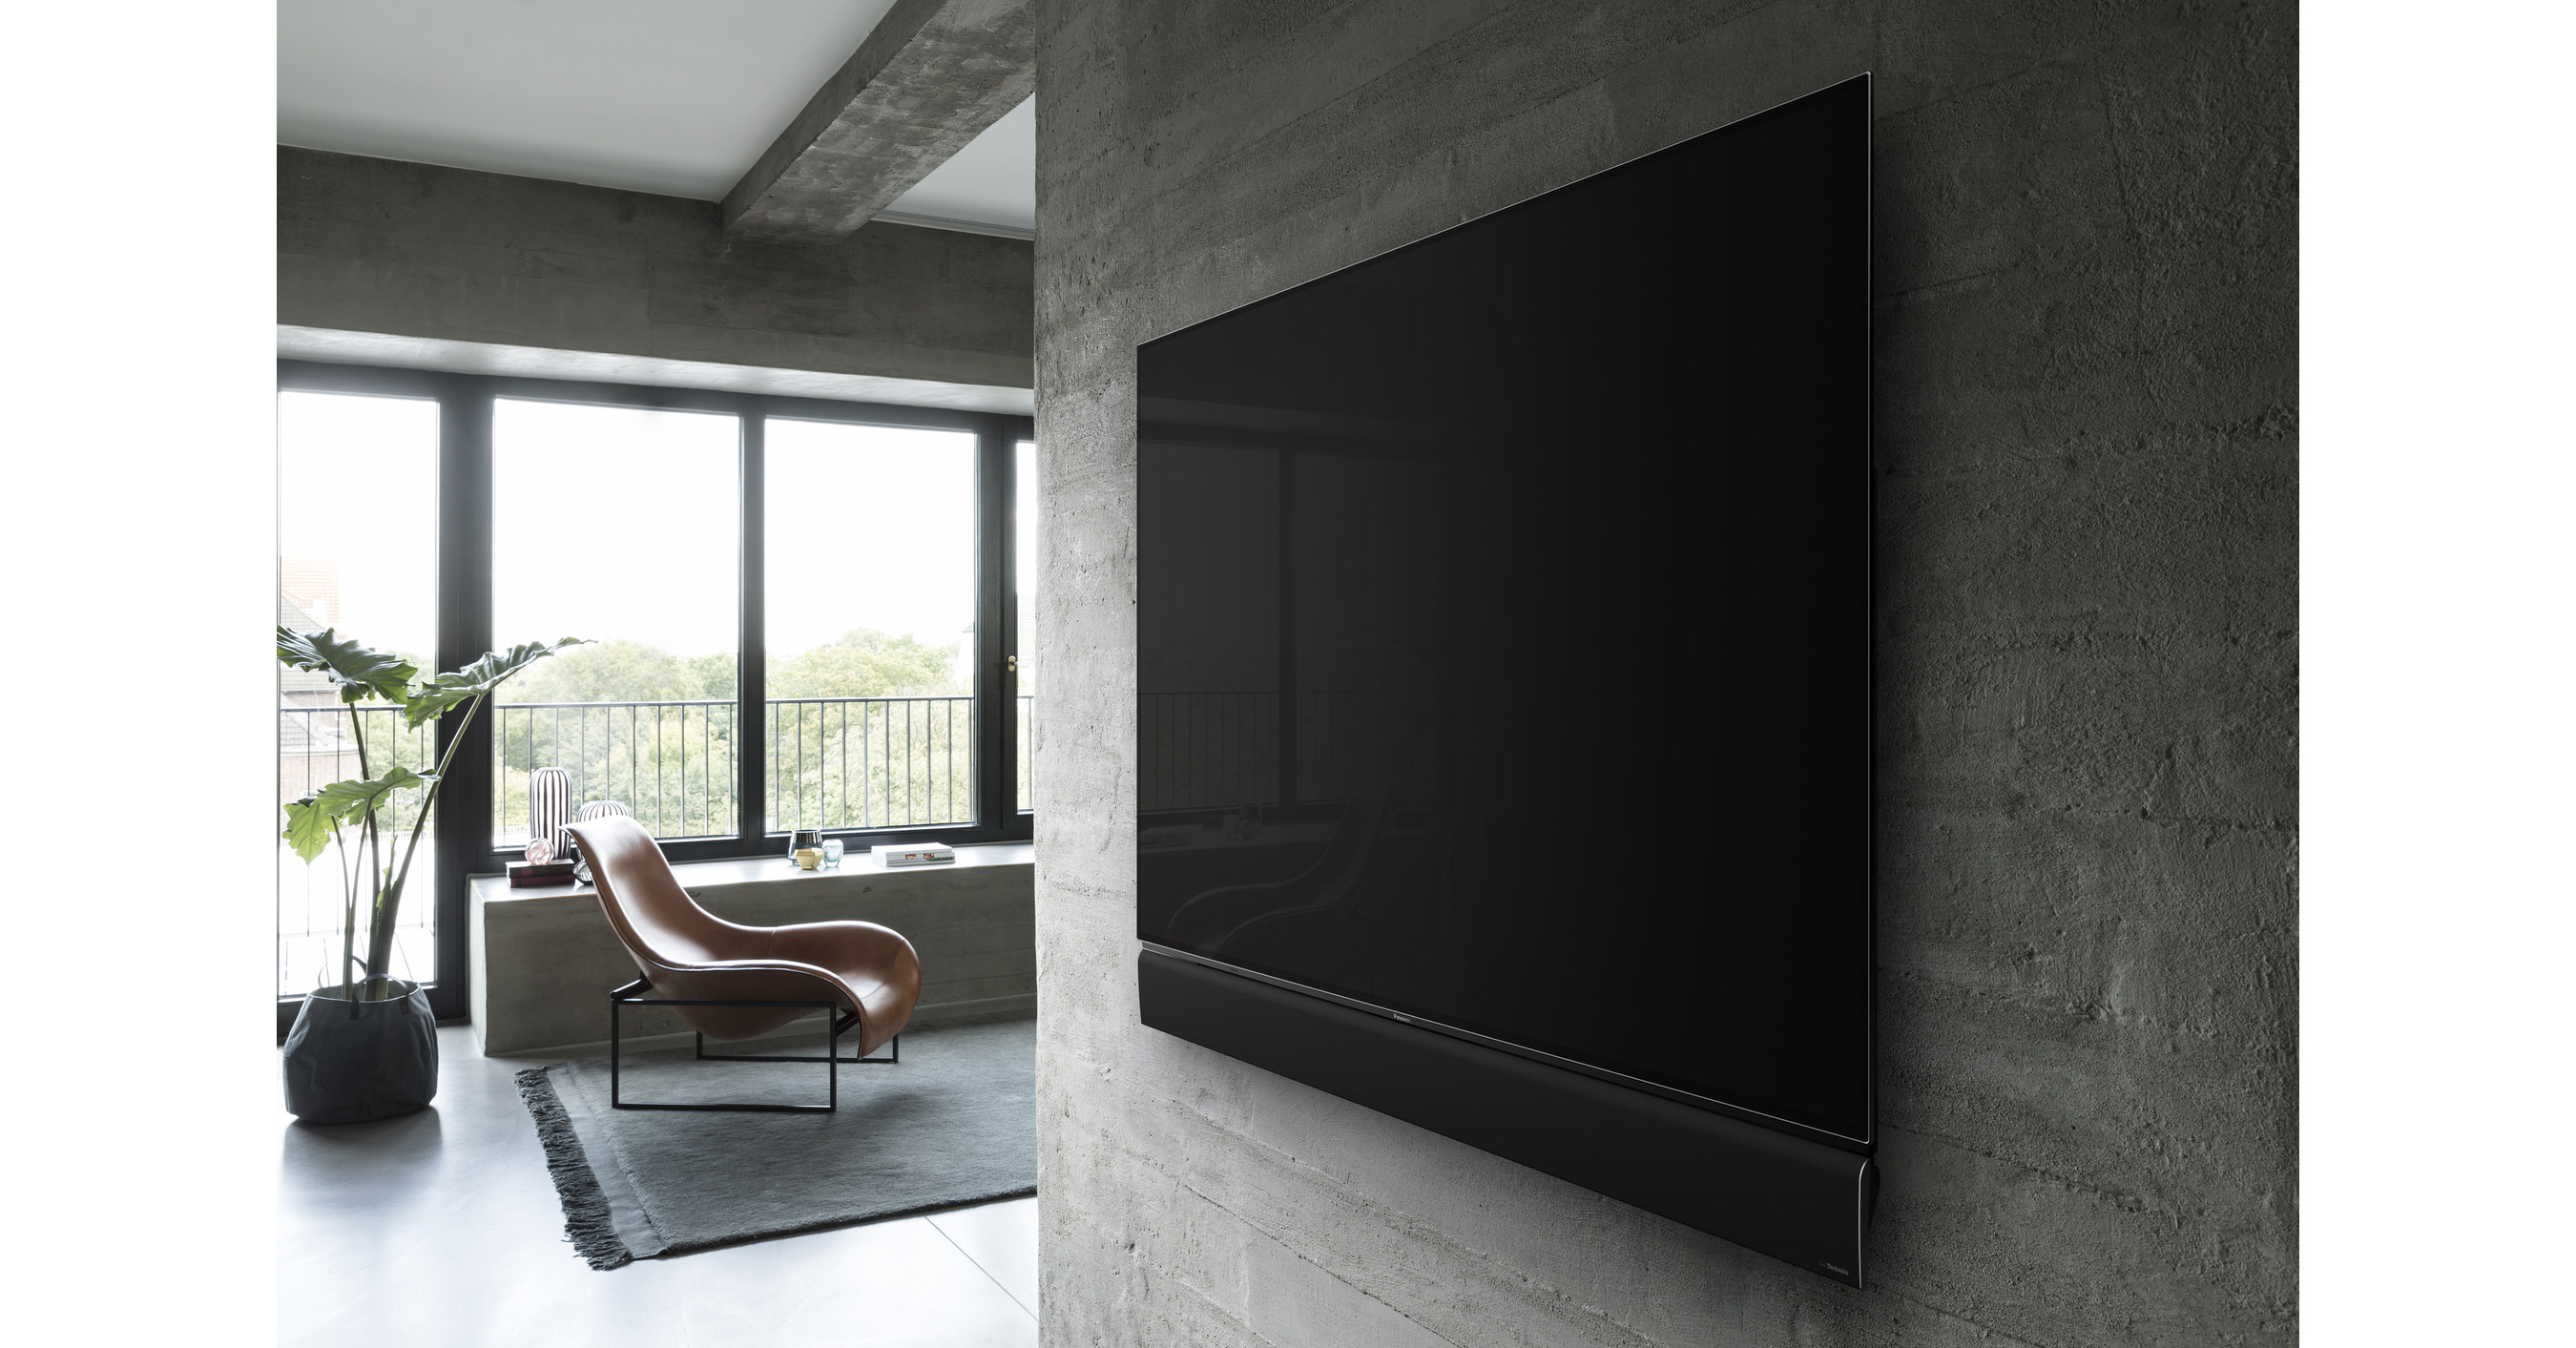 Panasonic expands TV line up with World's OLEDs to support HDR10+ dynamic metadata technology